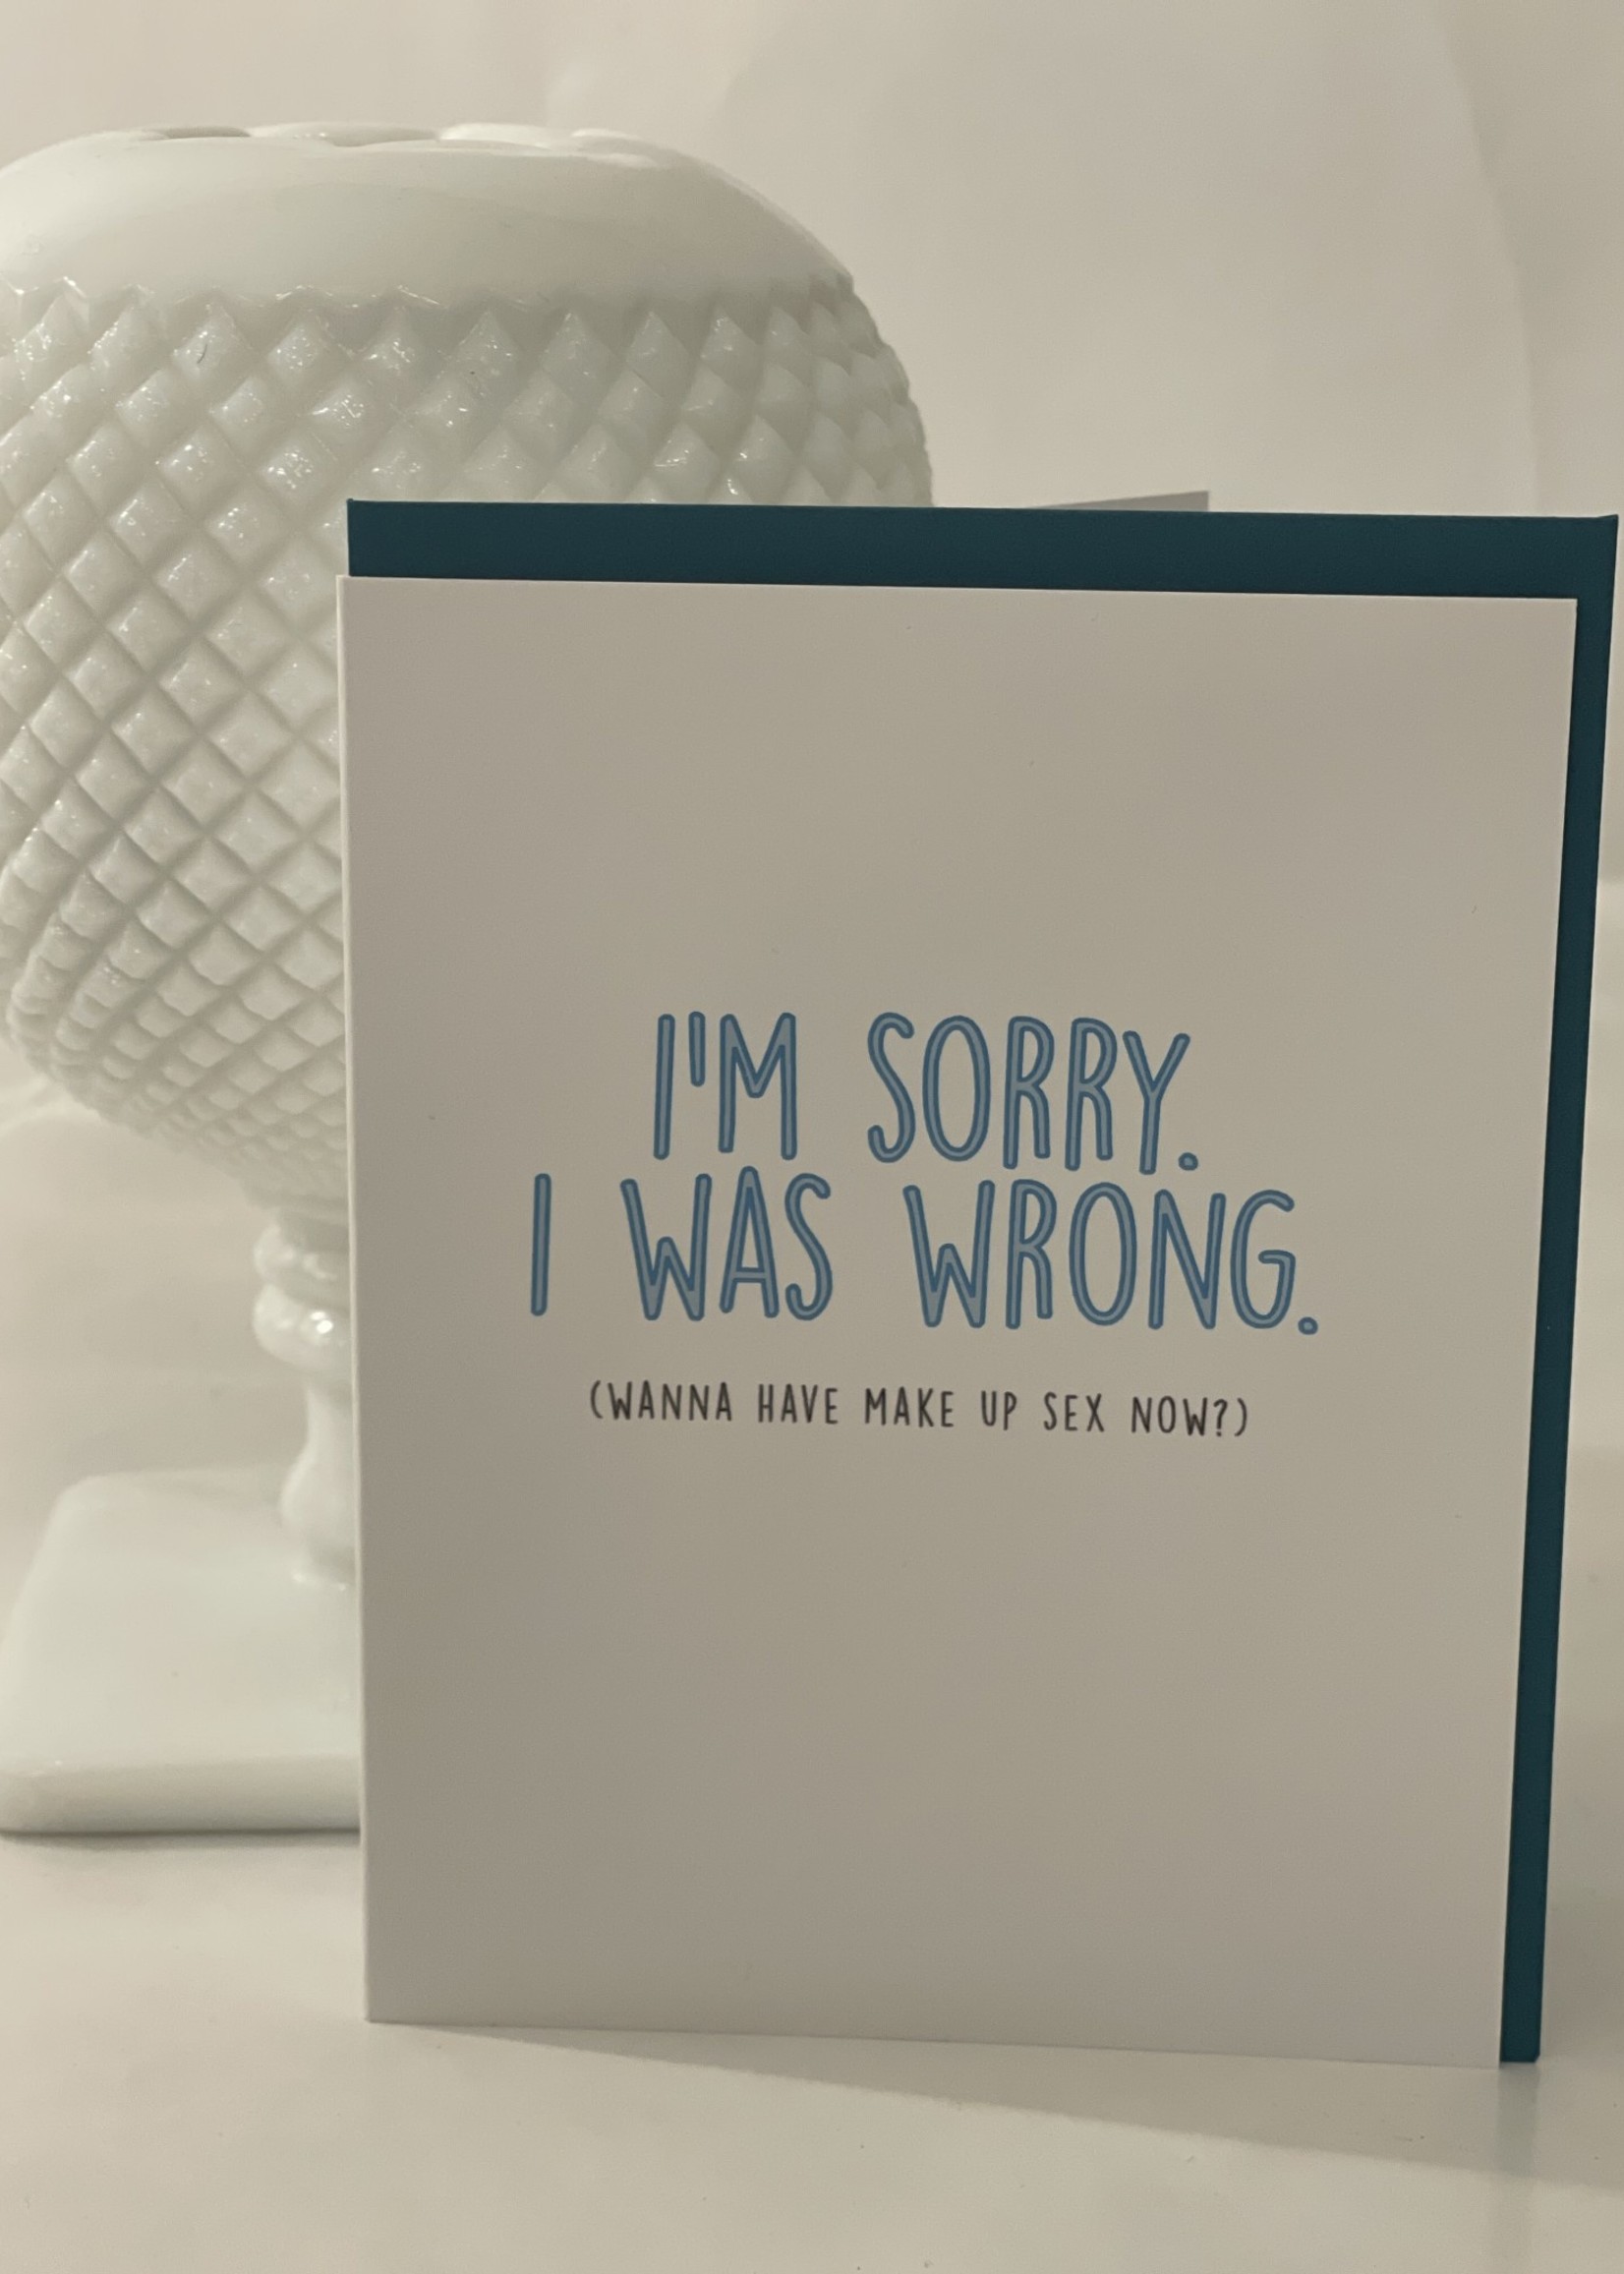 Meriwether I'm Sorry I was Wrong... makeup sex card